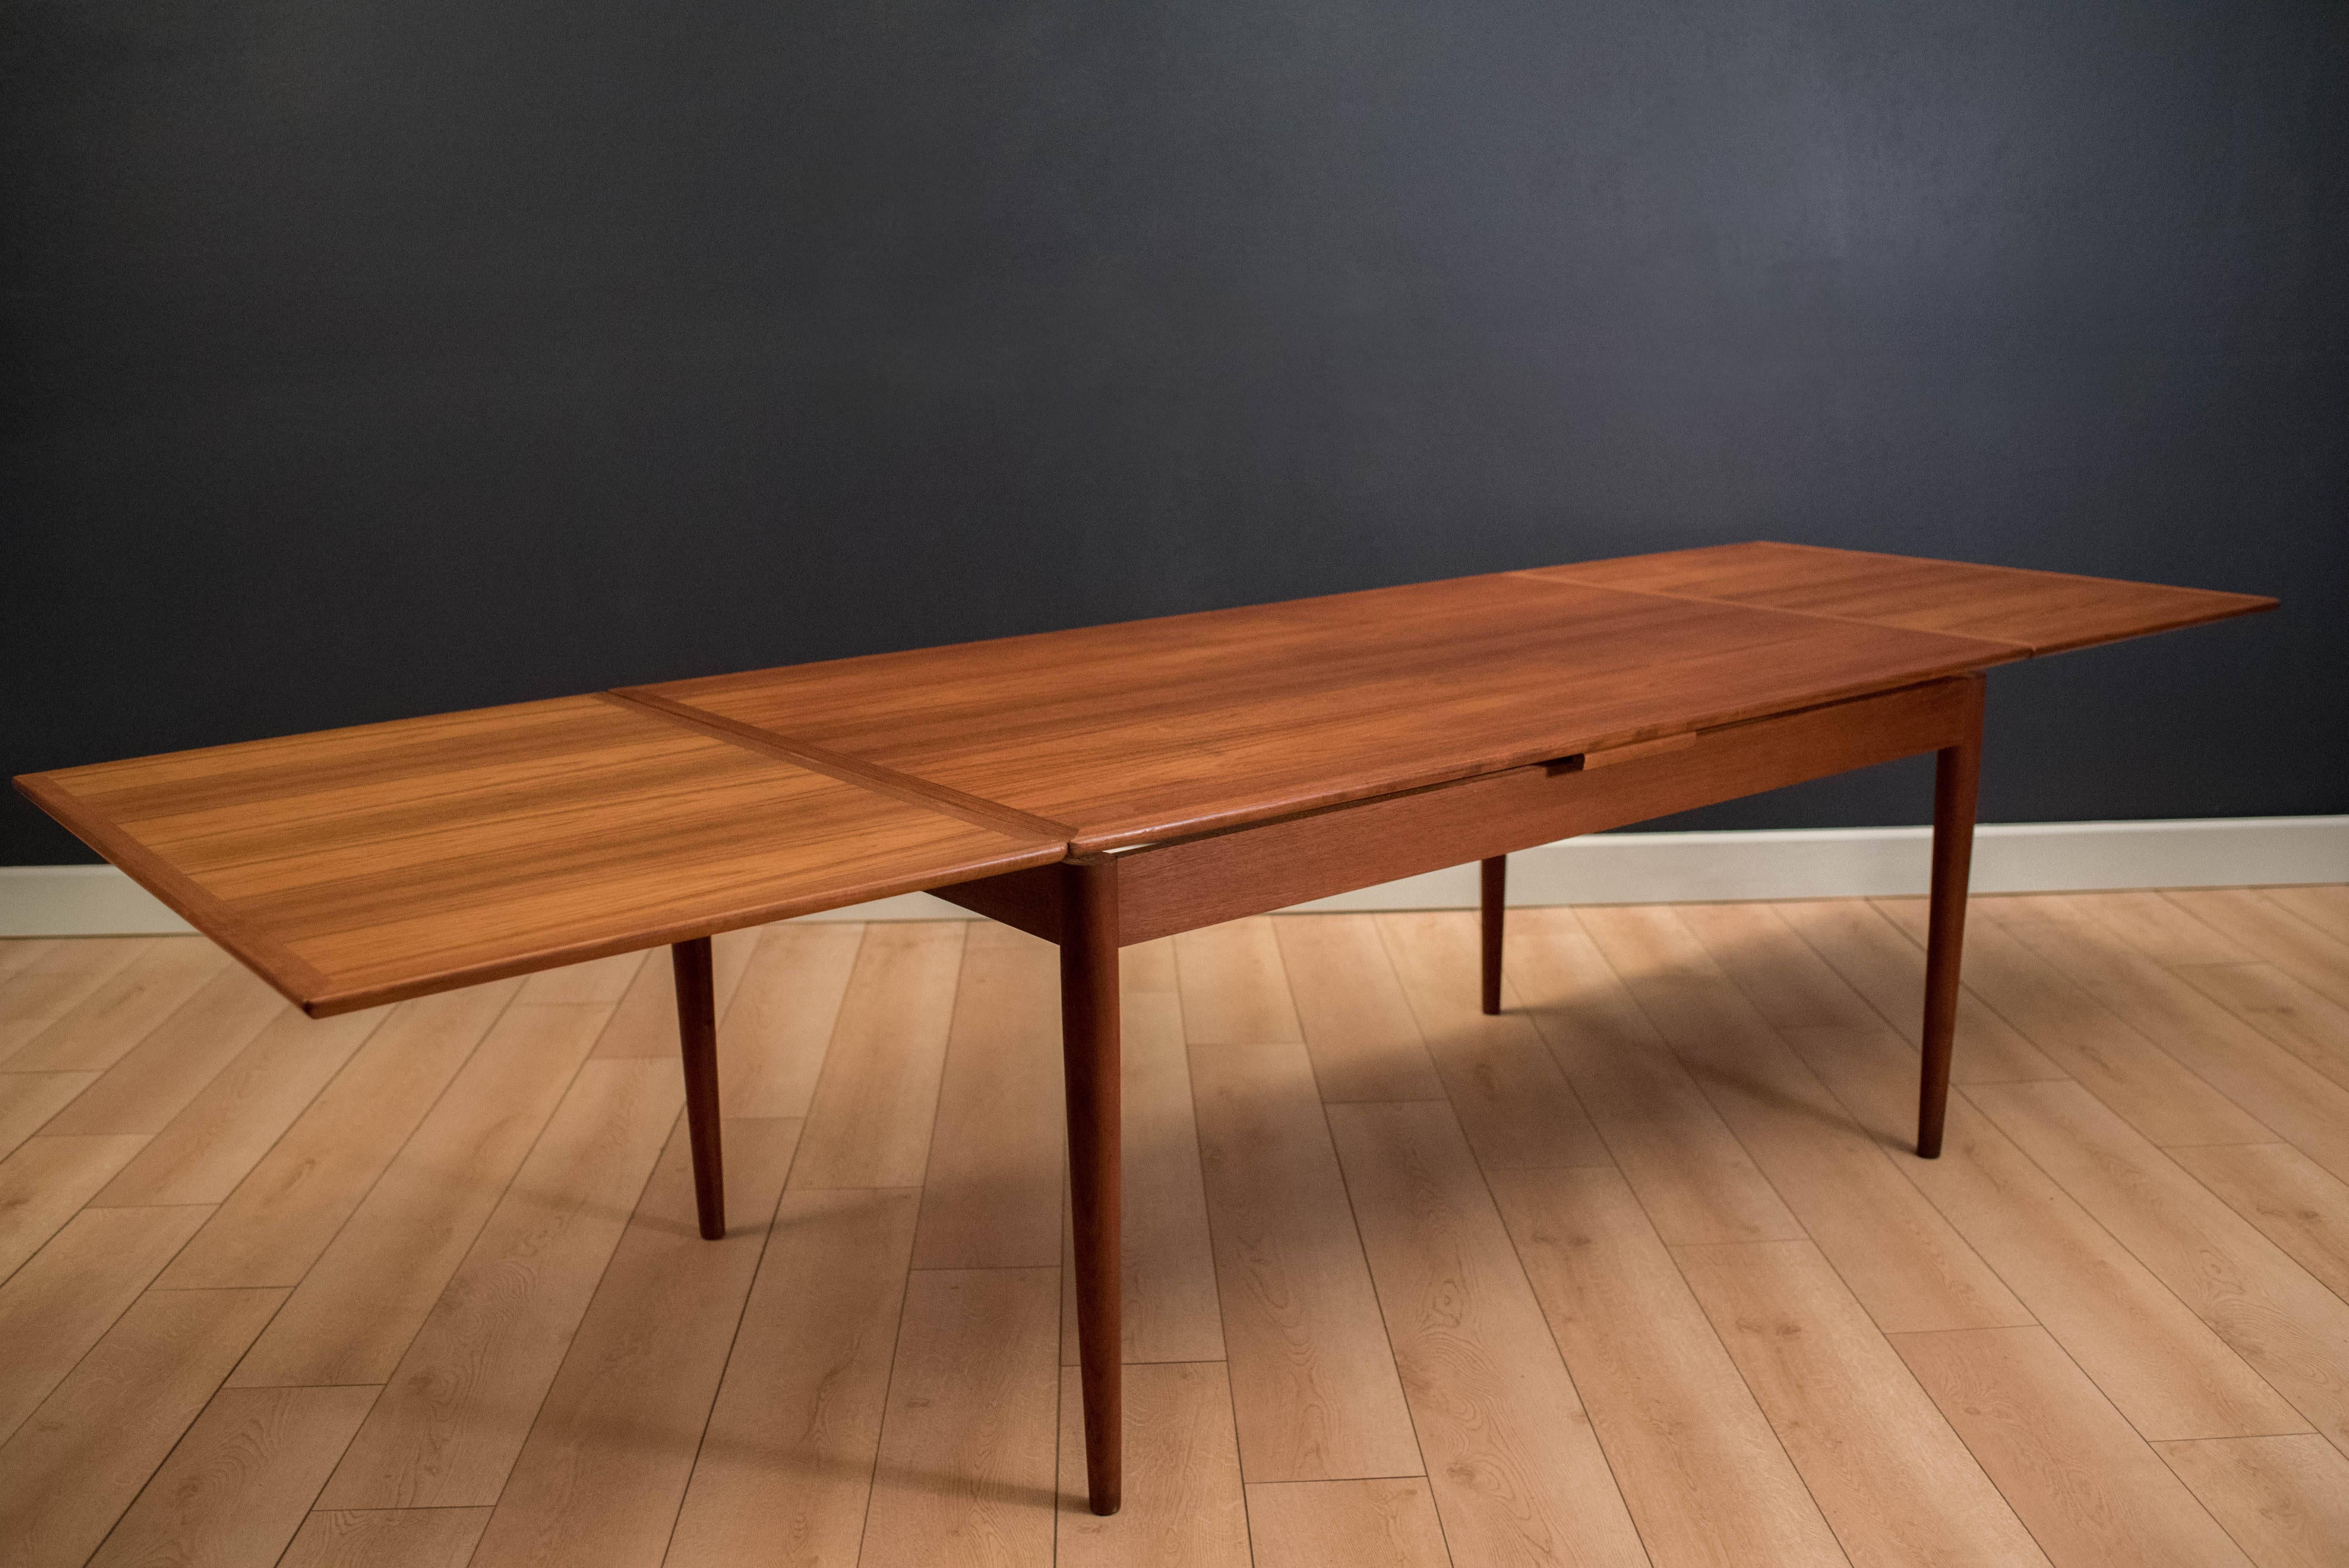 Danish Modern dining table by Hornslet Mobelfabrik in teak. This piece expands with two separate leaves that store underneath tabletop.

Dimensions: 117